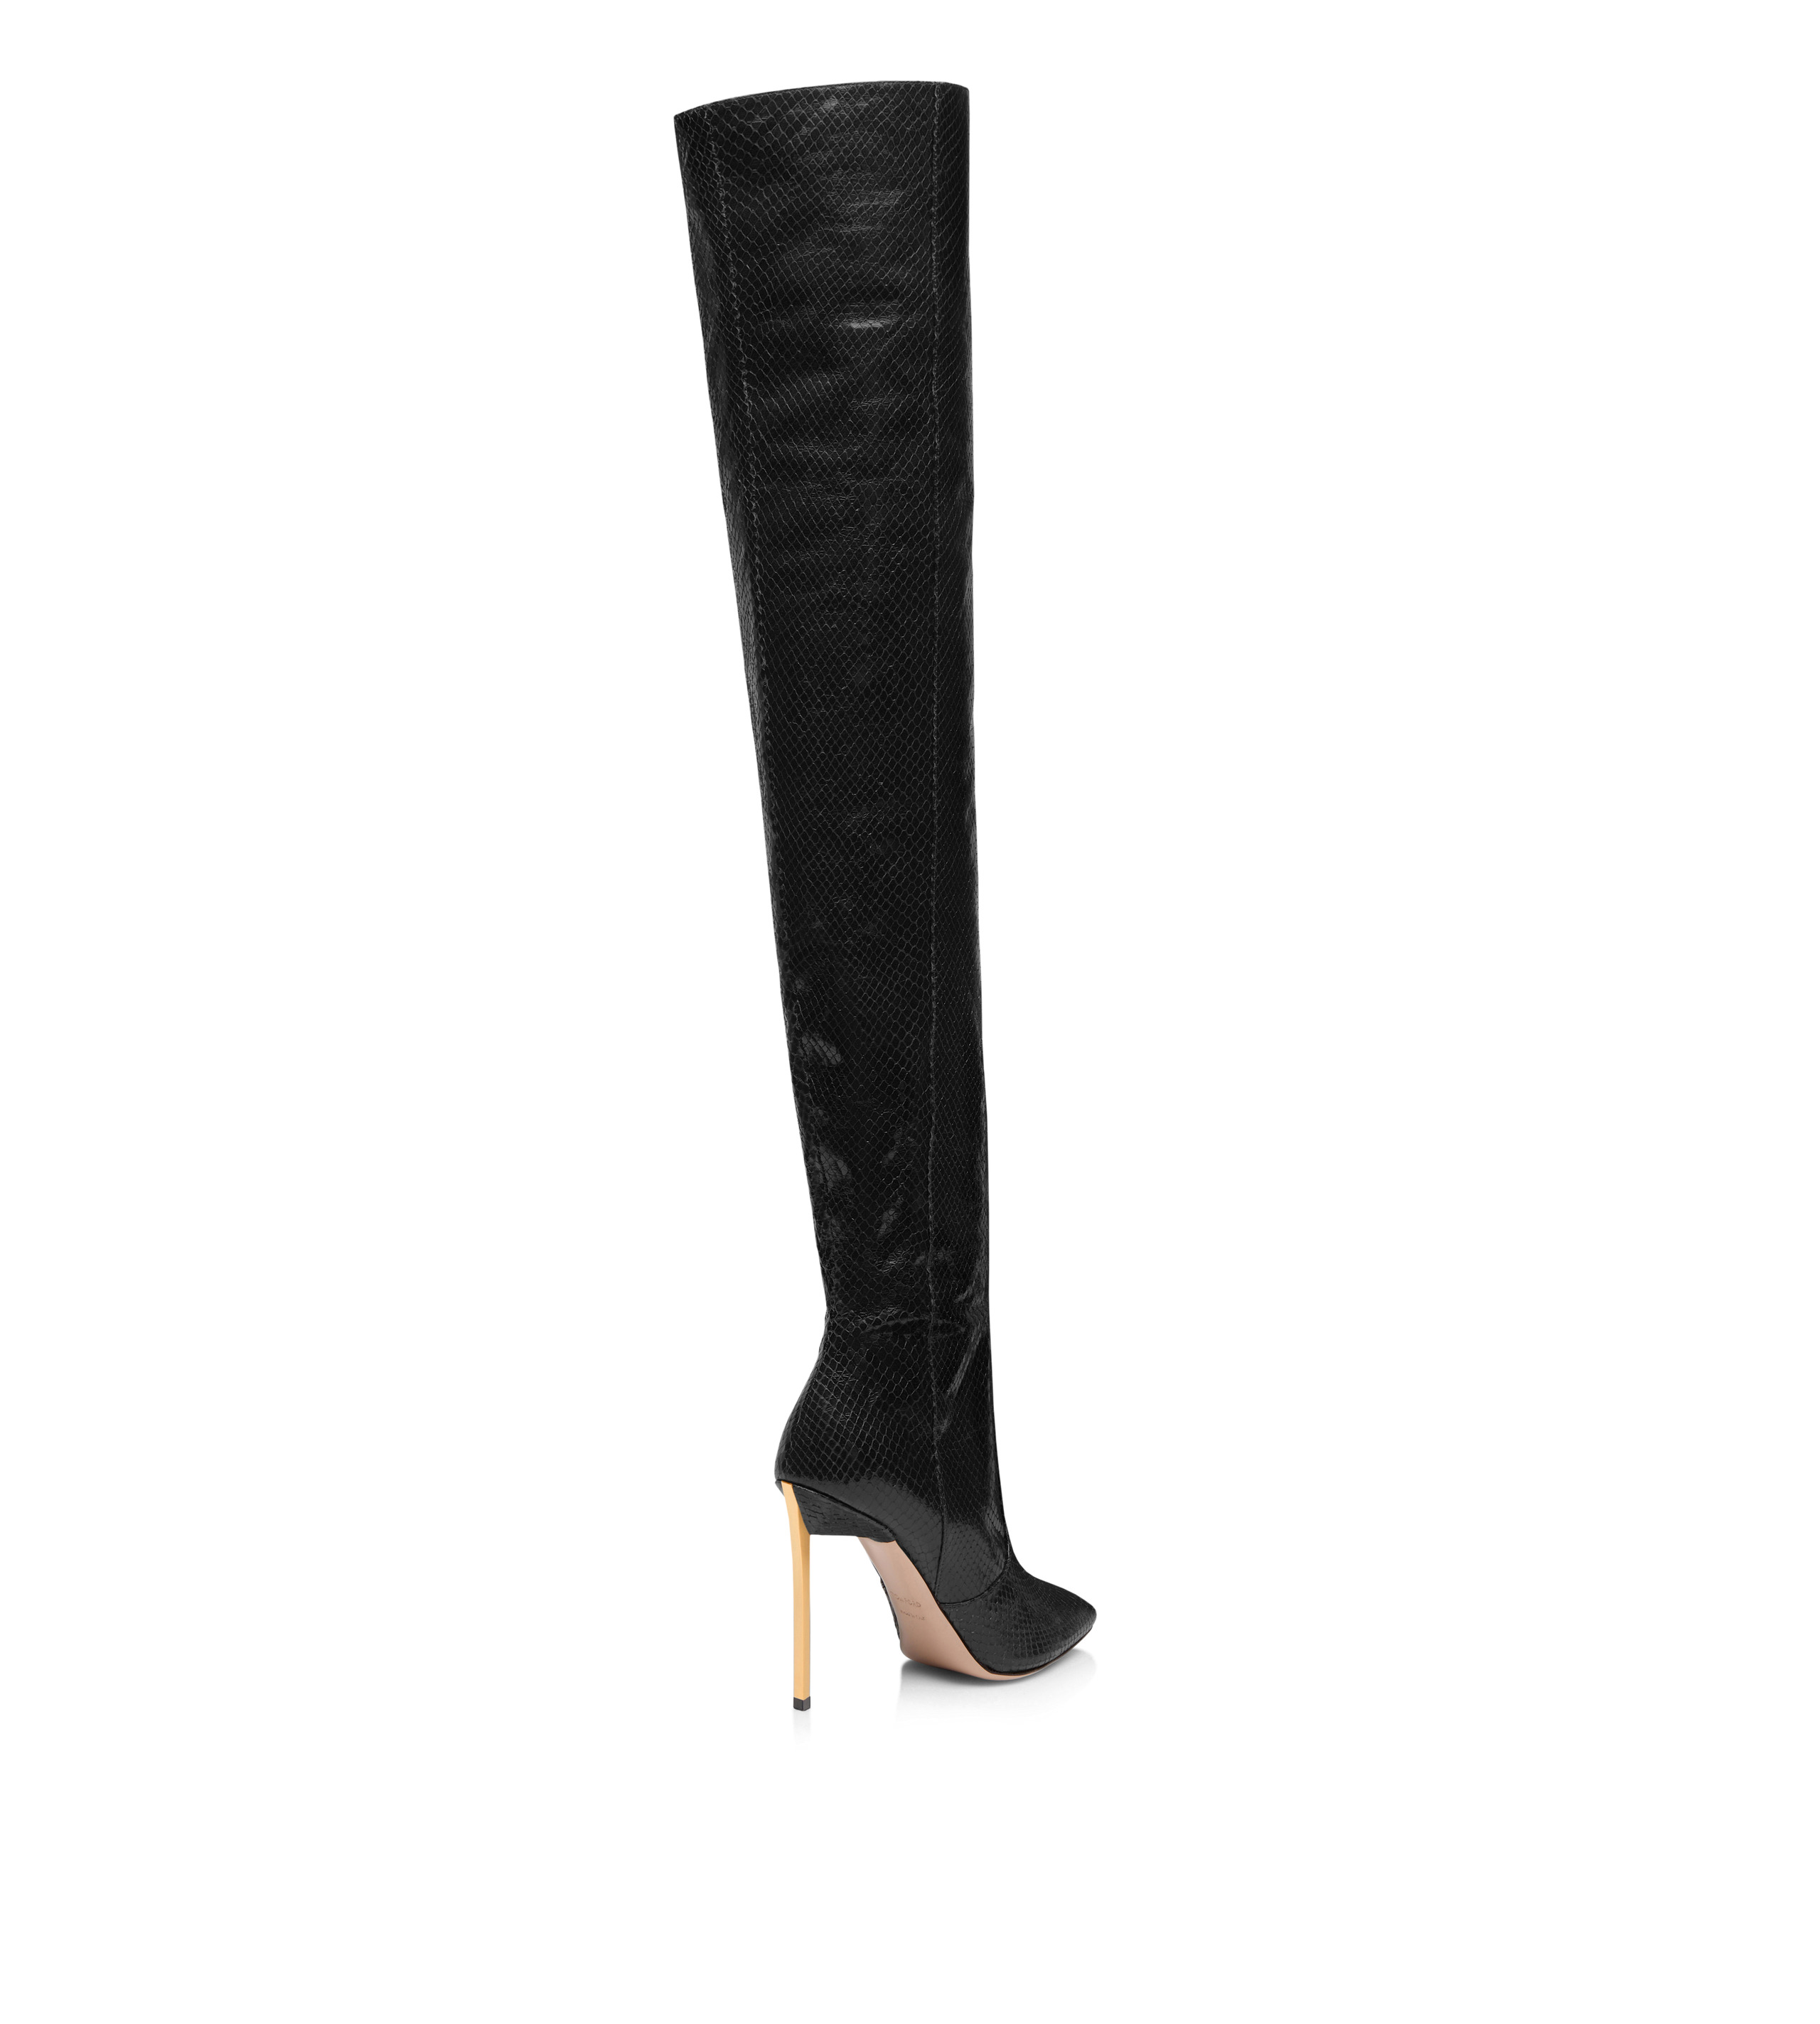 STAMPED PYTHON LEATHER CARINE OVER THE KNEE BOOT - 3